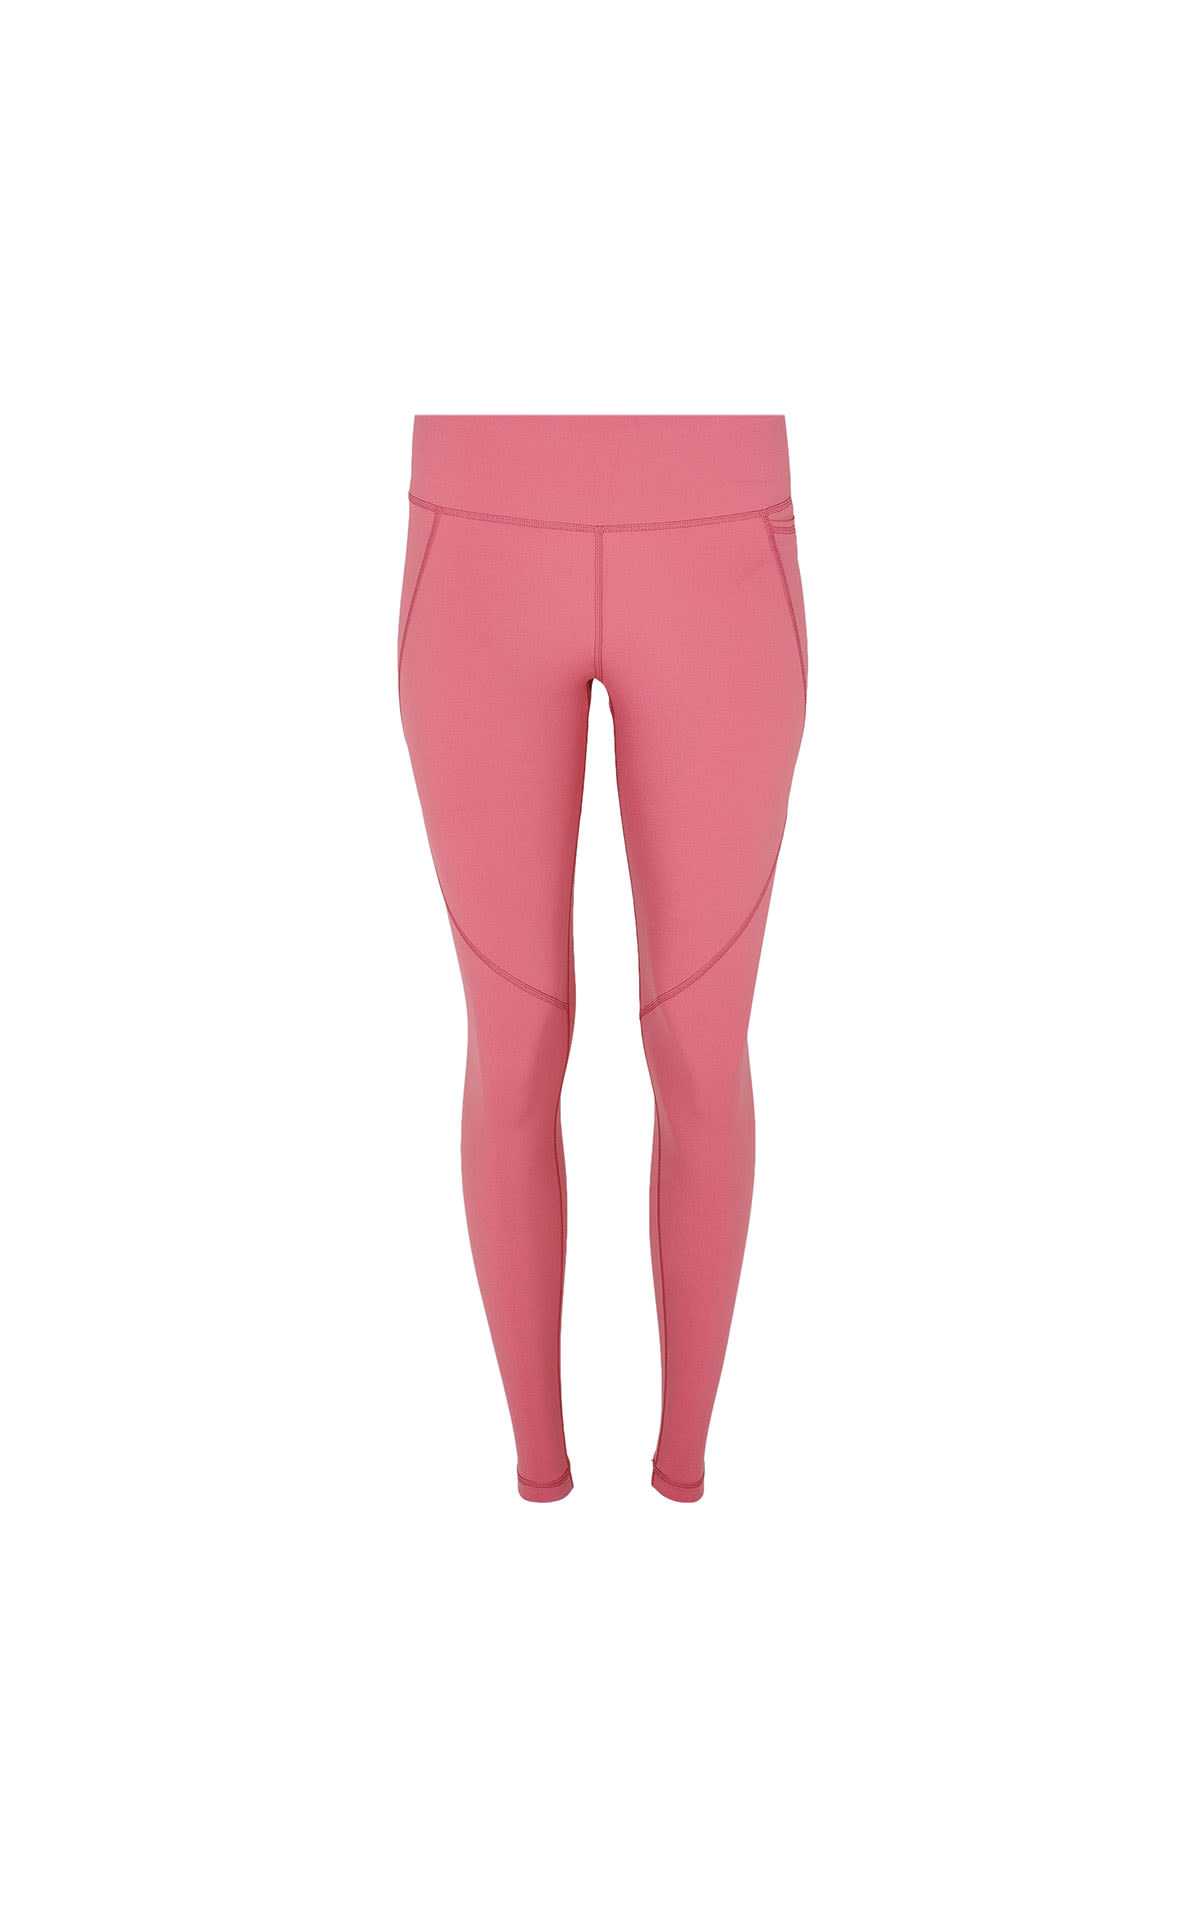 Sweaty Betty Power workout leggings adventure pink from Bicester Village